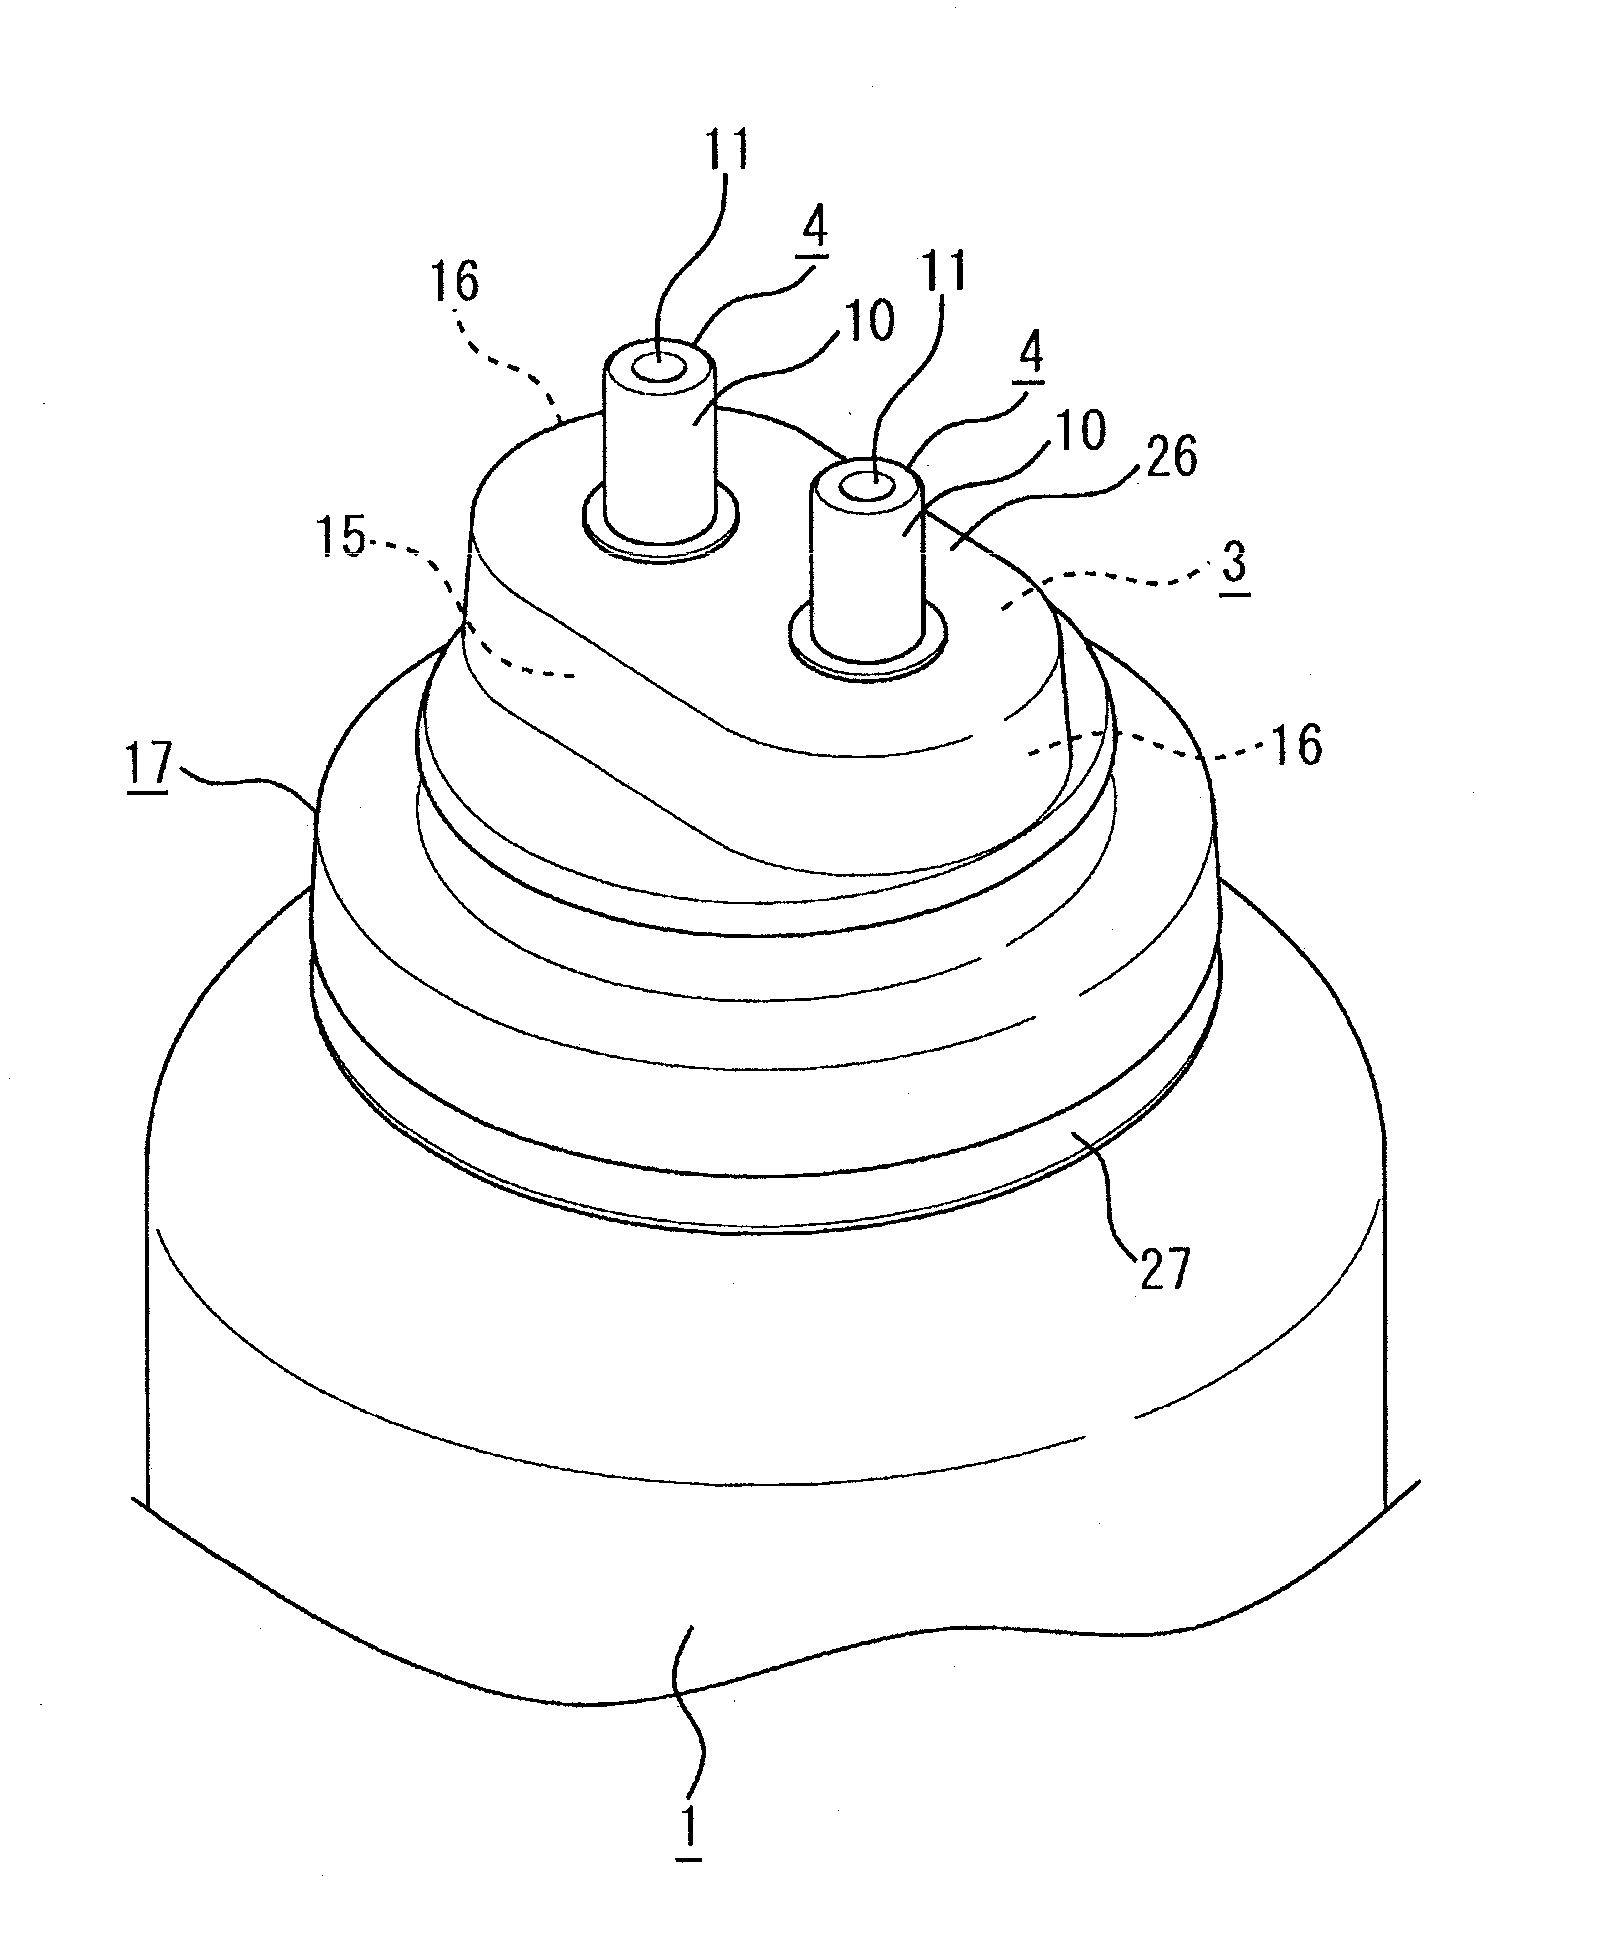 Aerosol device for allocation of plurality of fluids